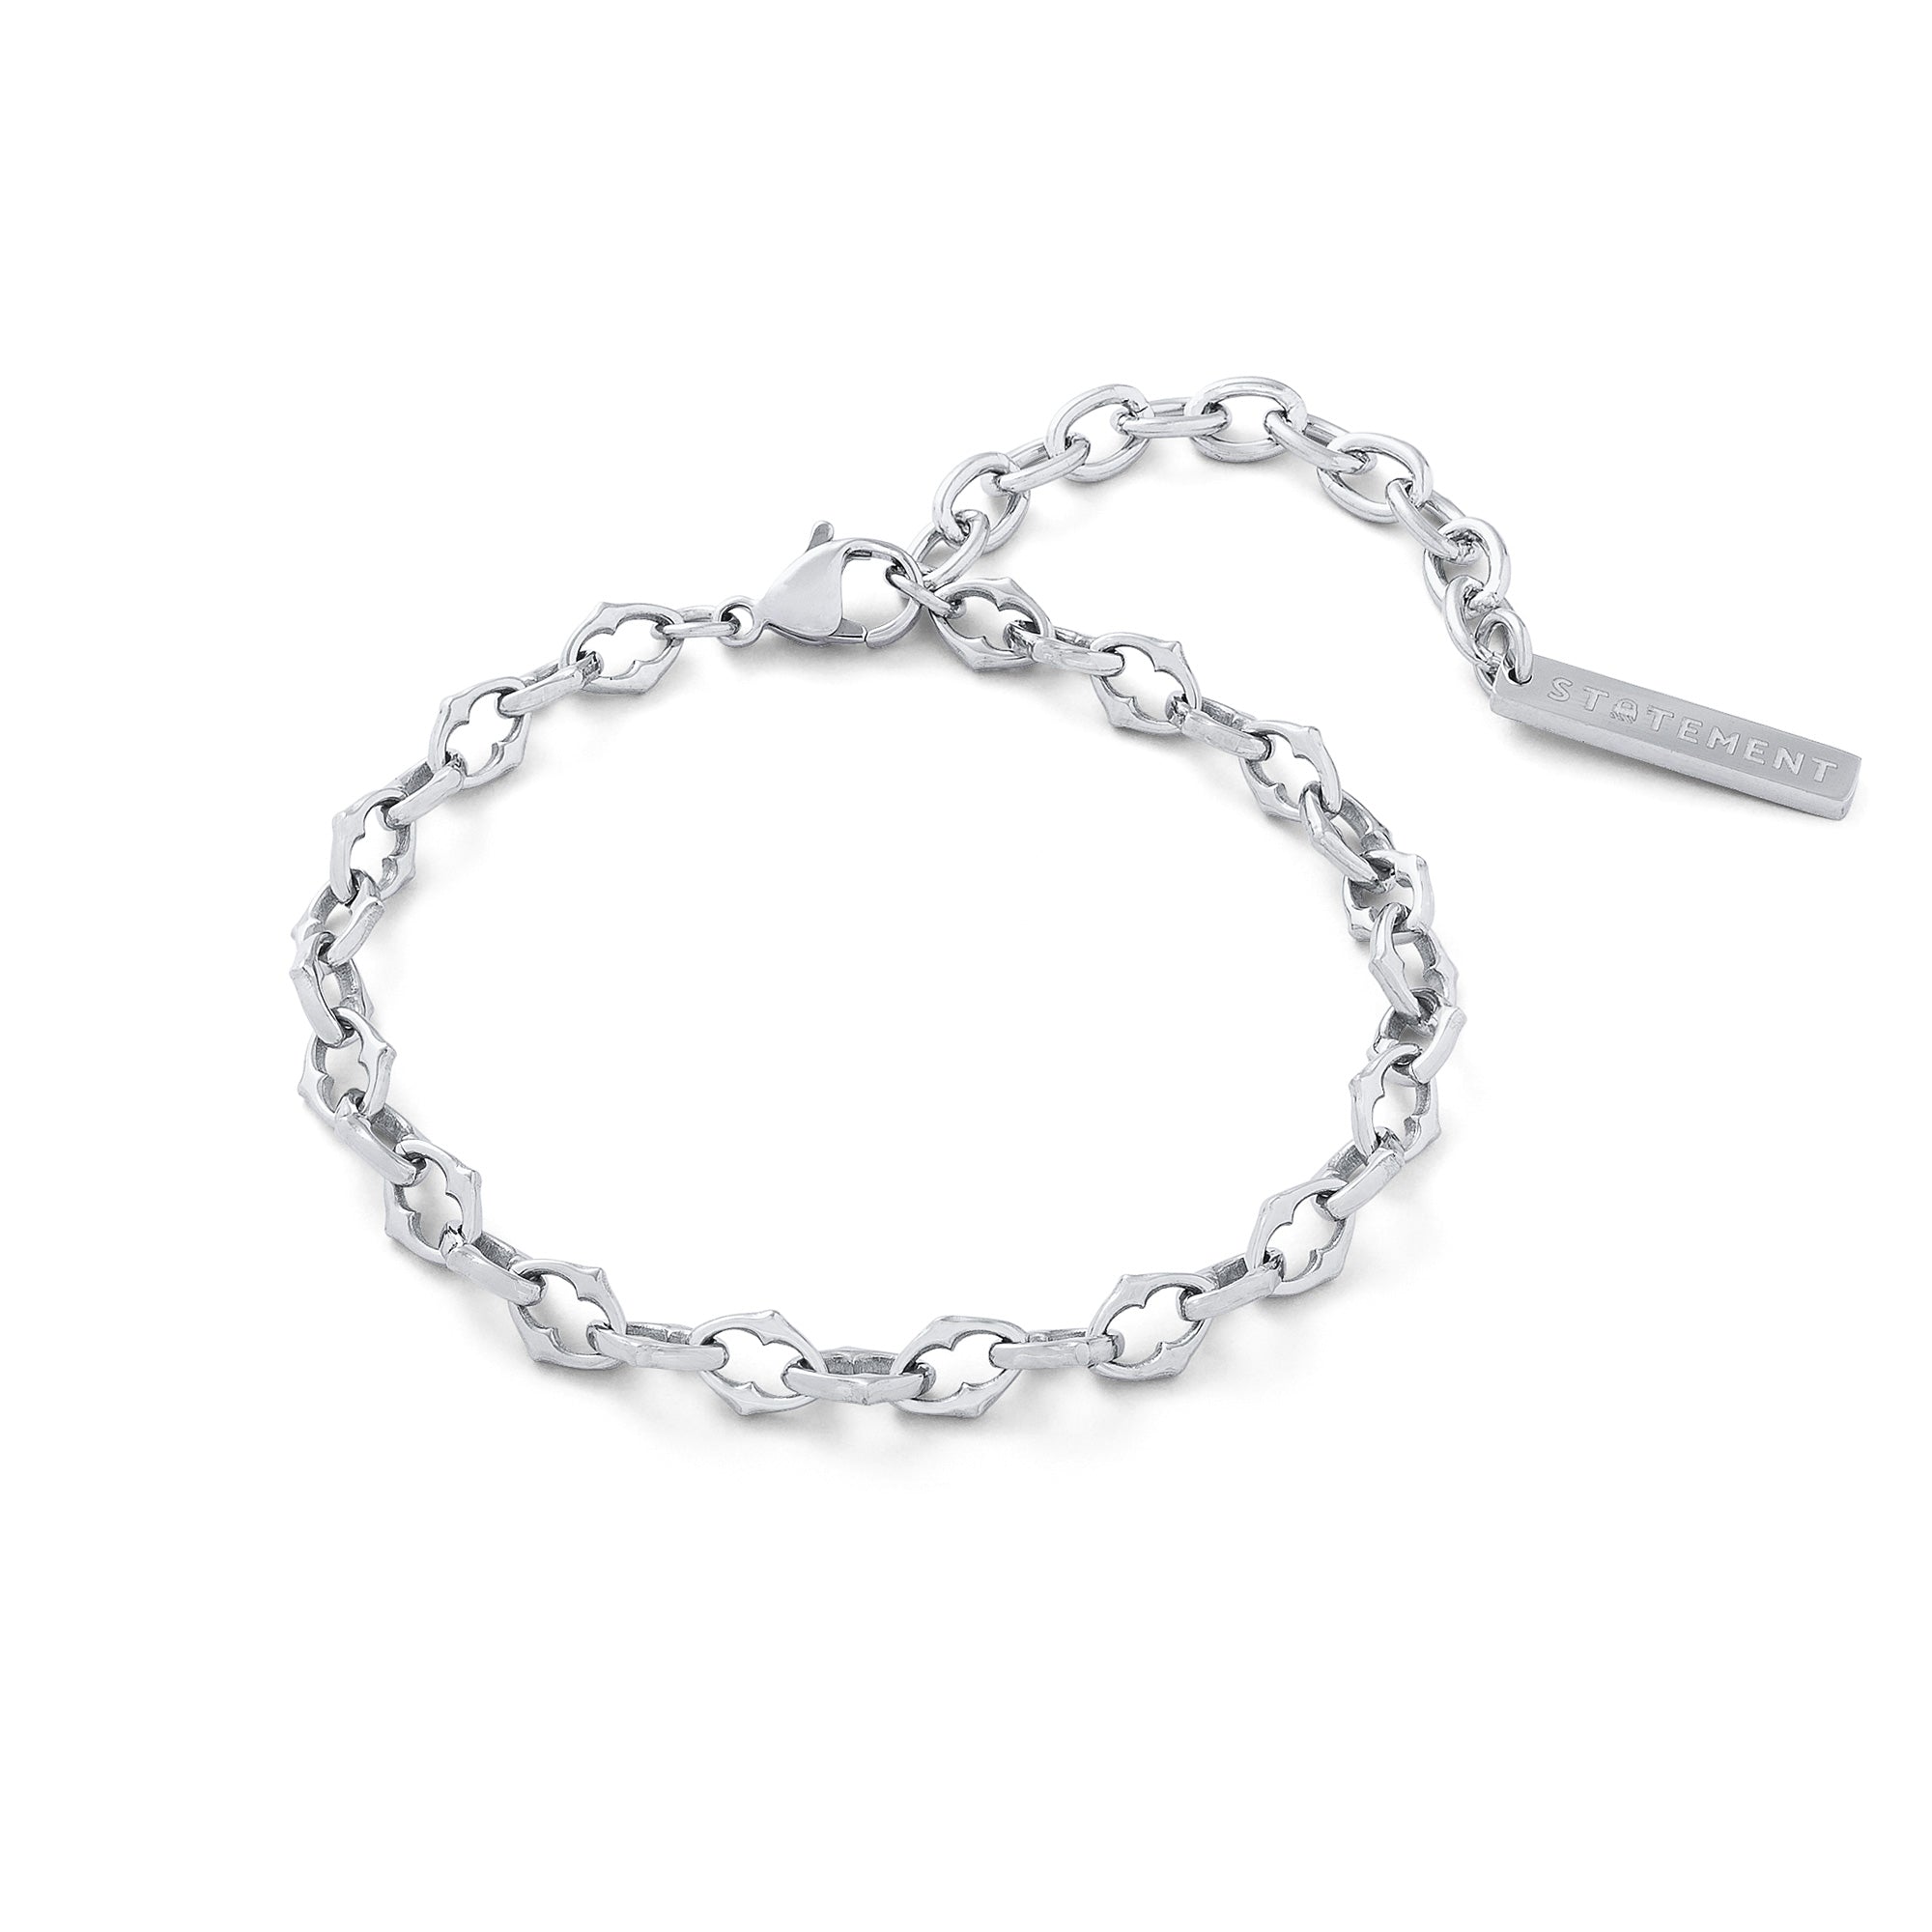 Silver spiked link chain bracelet on white background